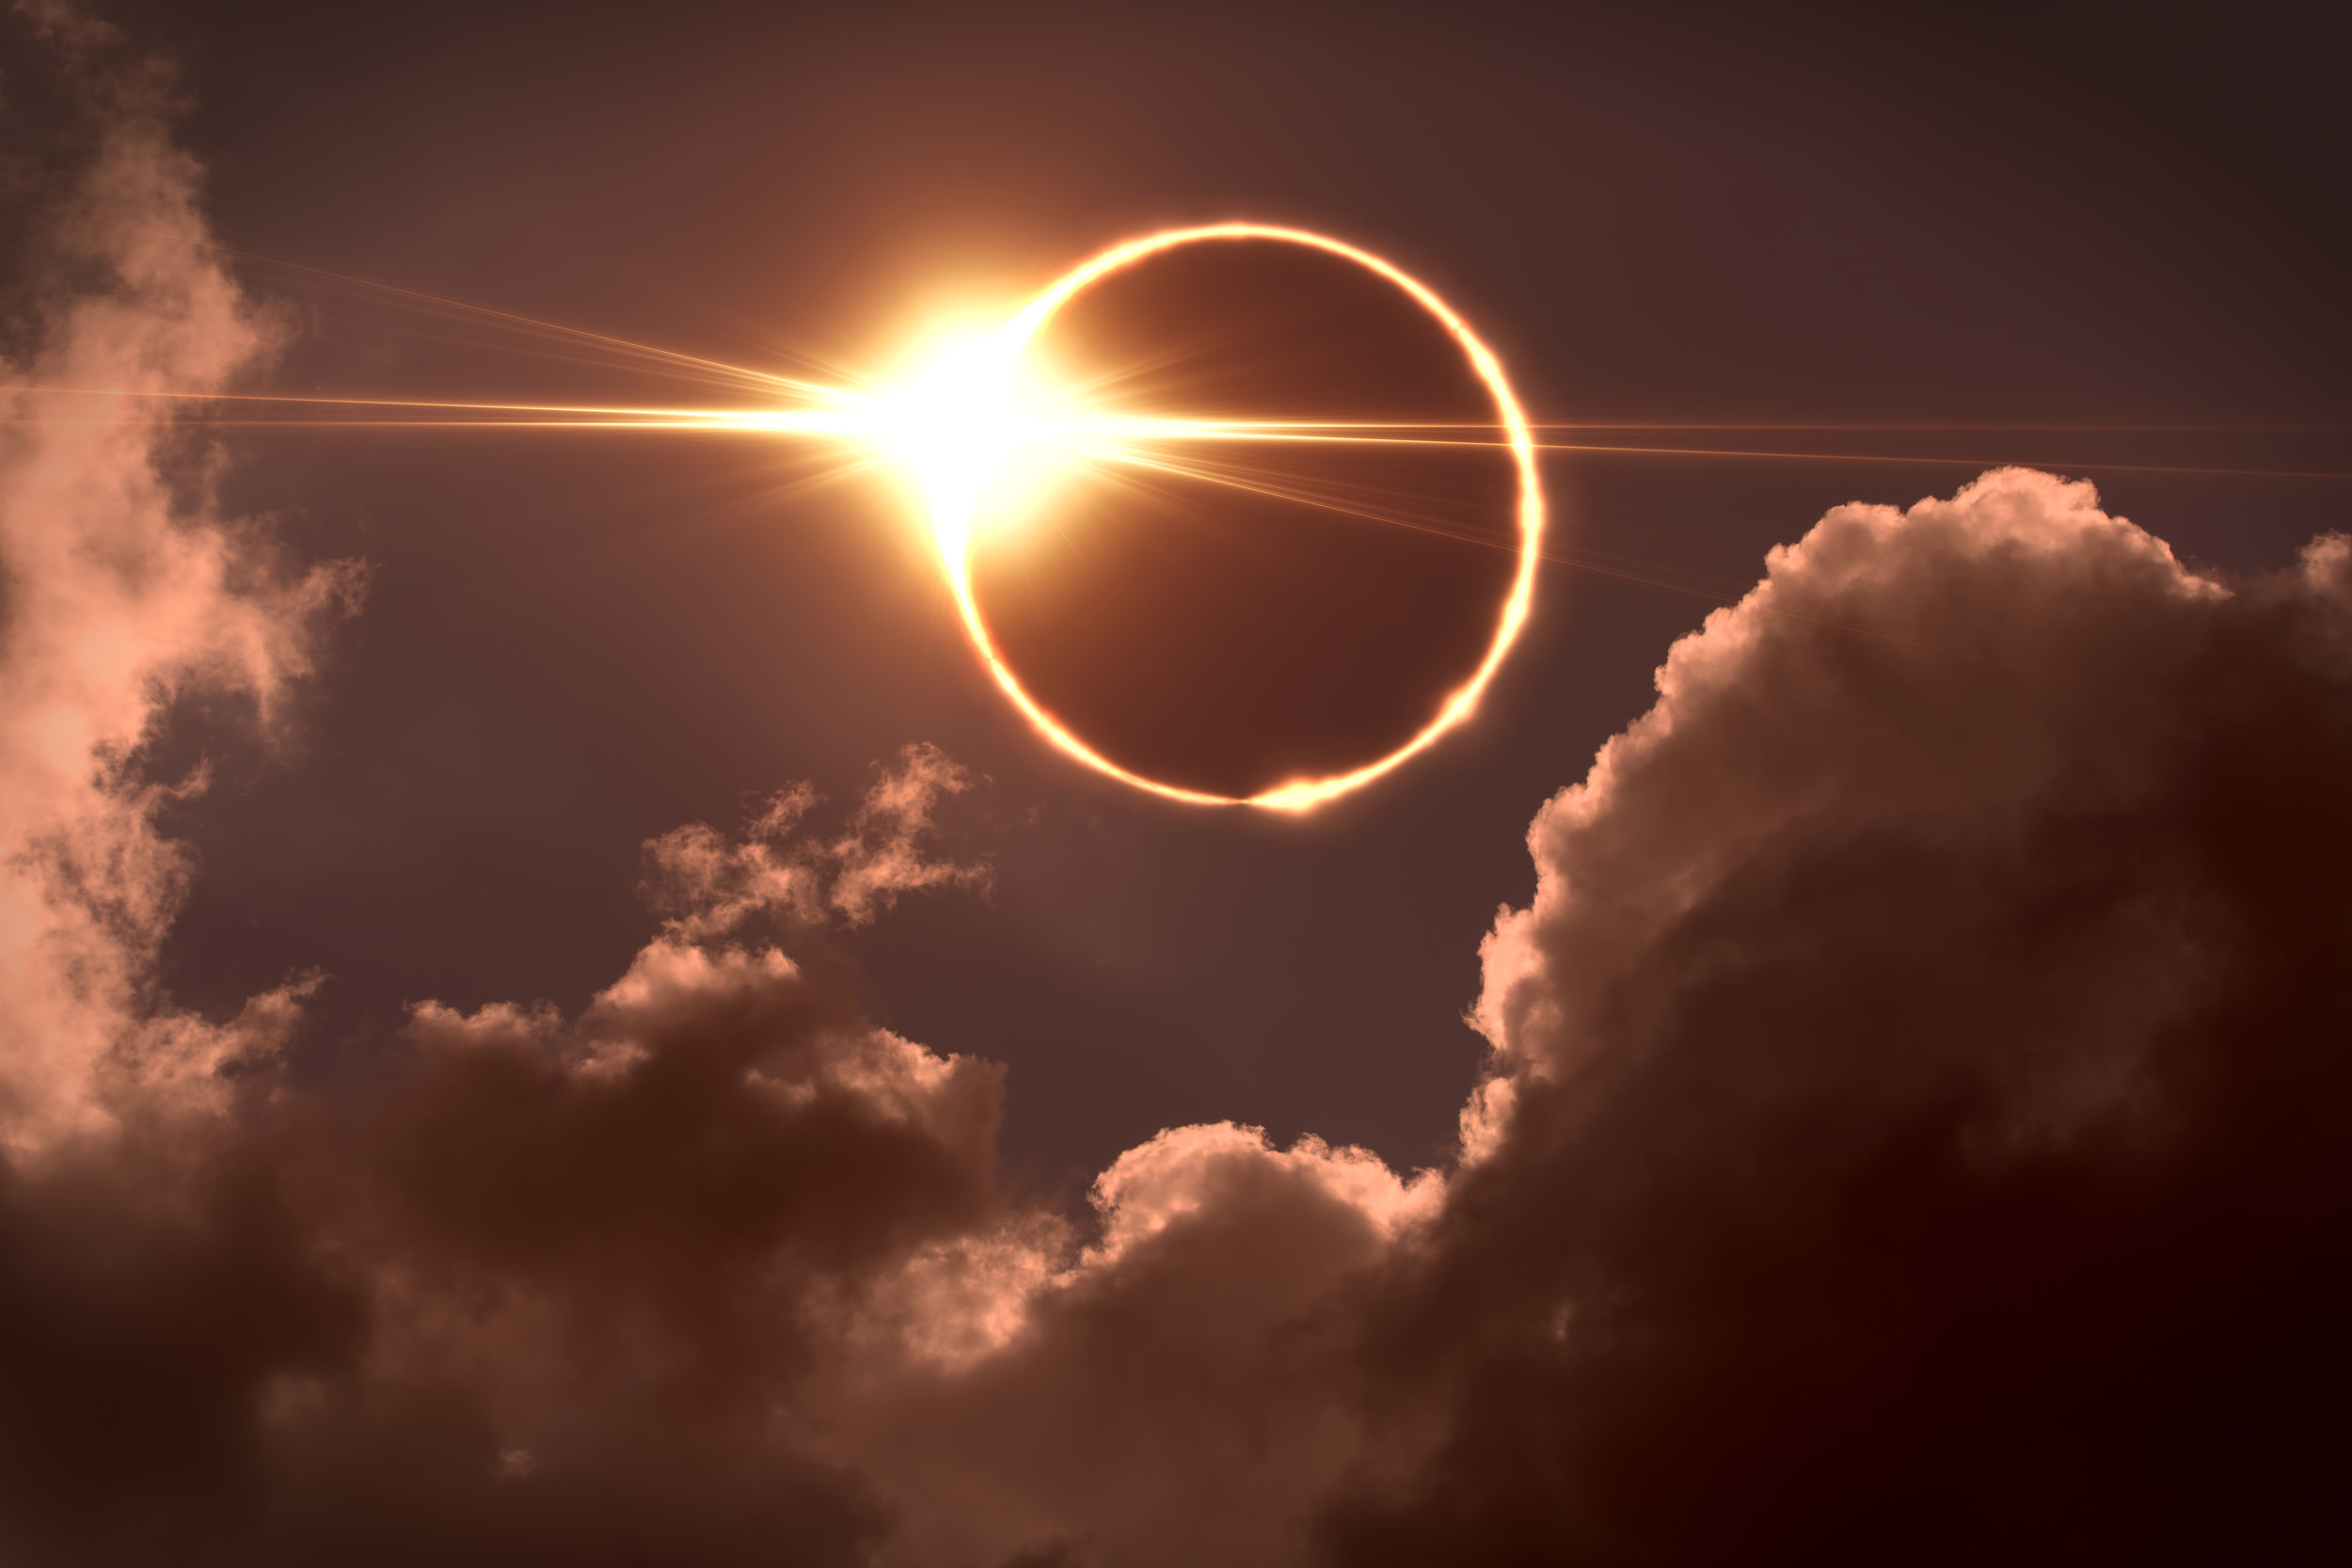 The Latest Weather Forecasts Reveal Best Cities for Solar Eclipse